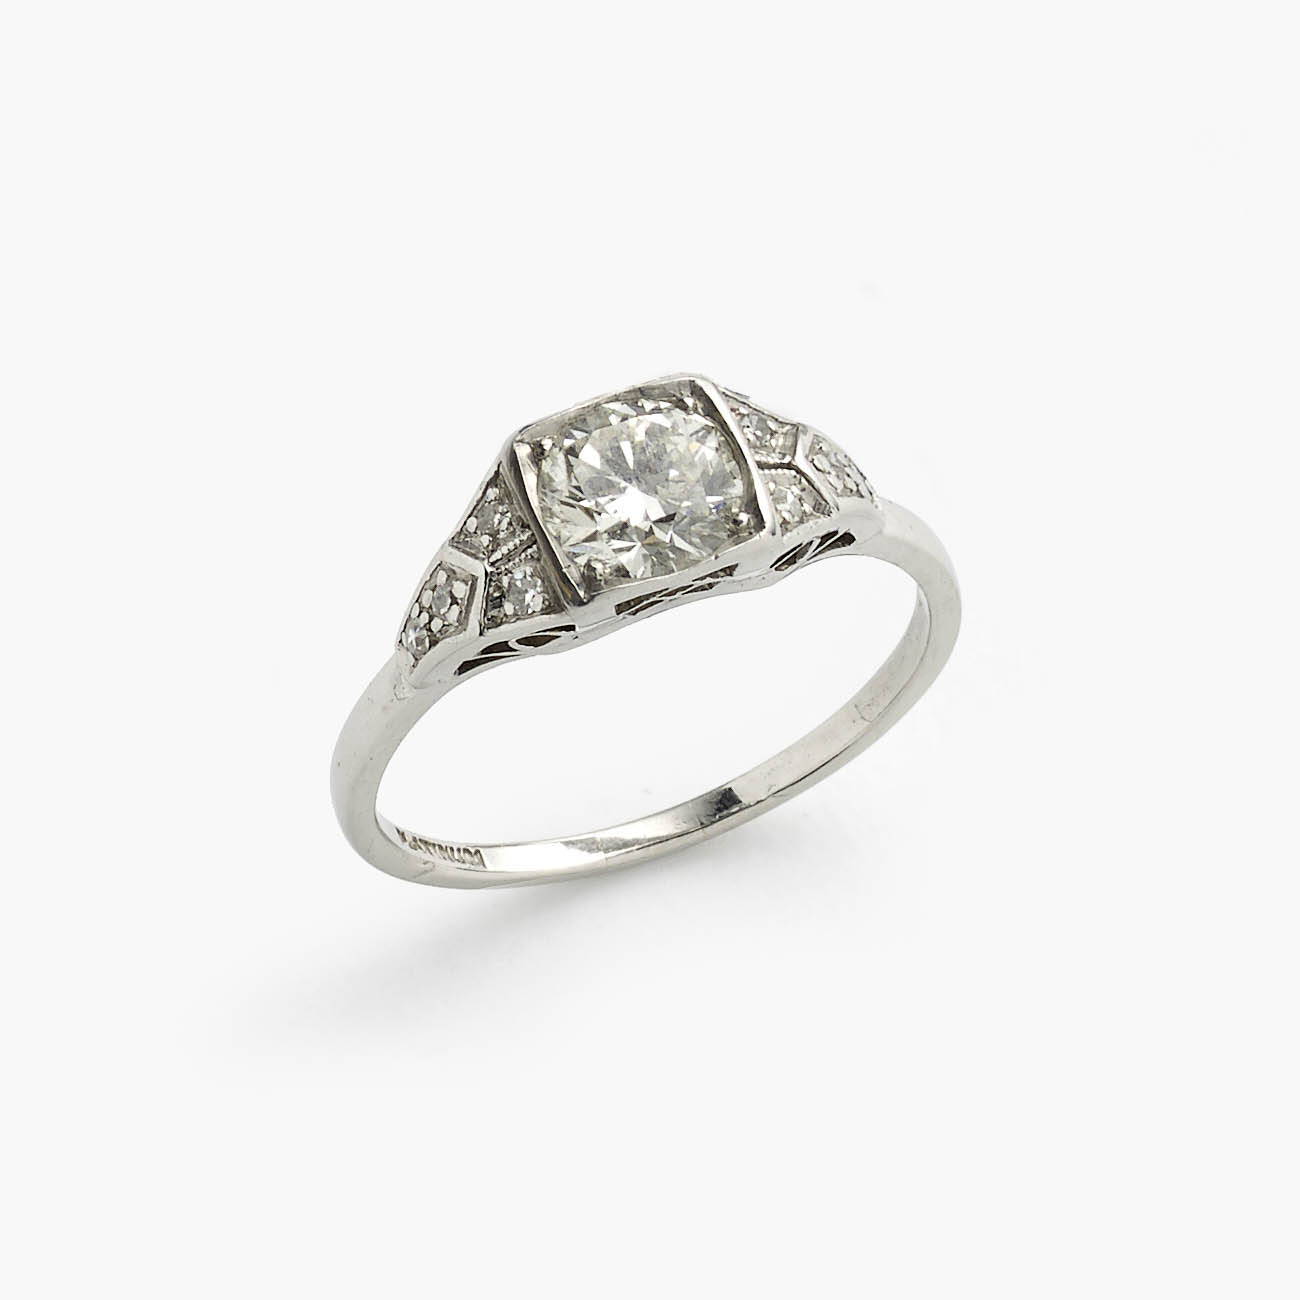 Vintage Diamond Engagement Ring Jewellery Discovery